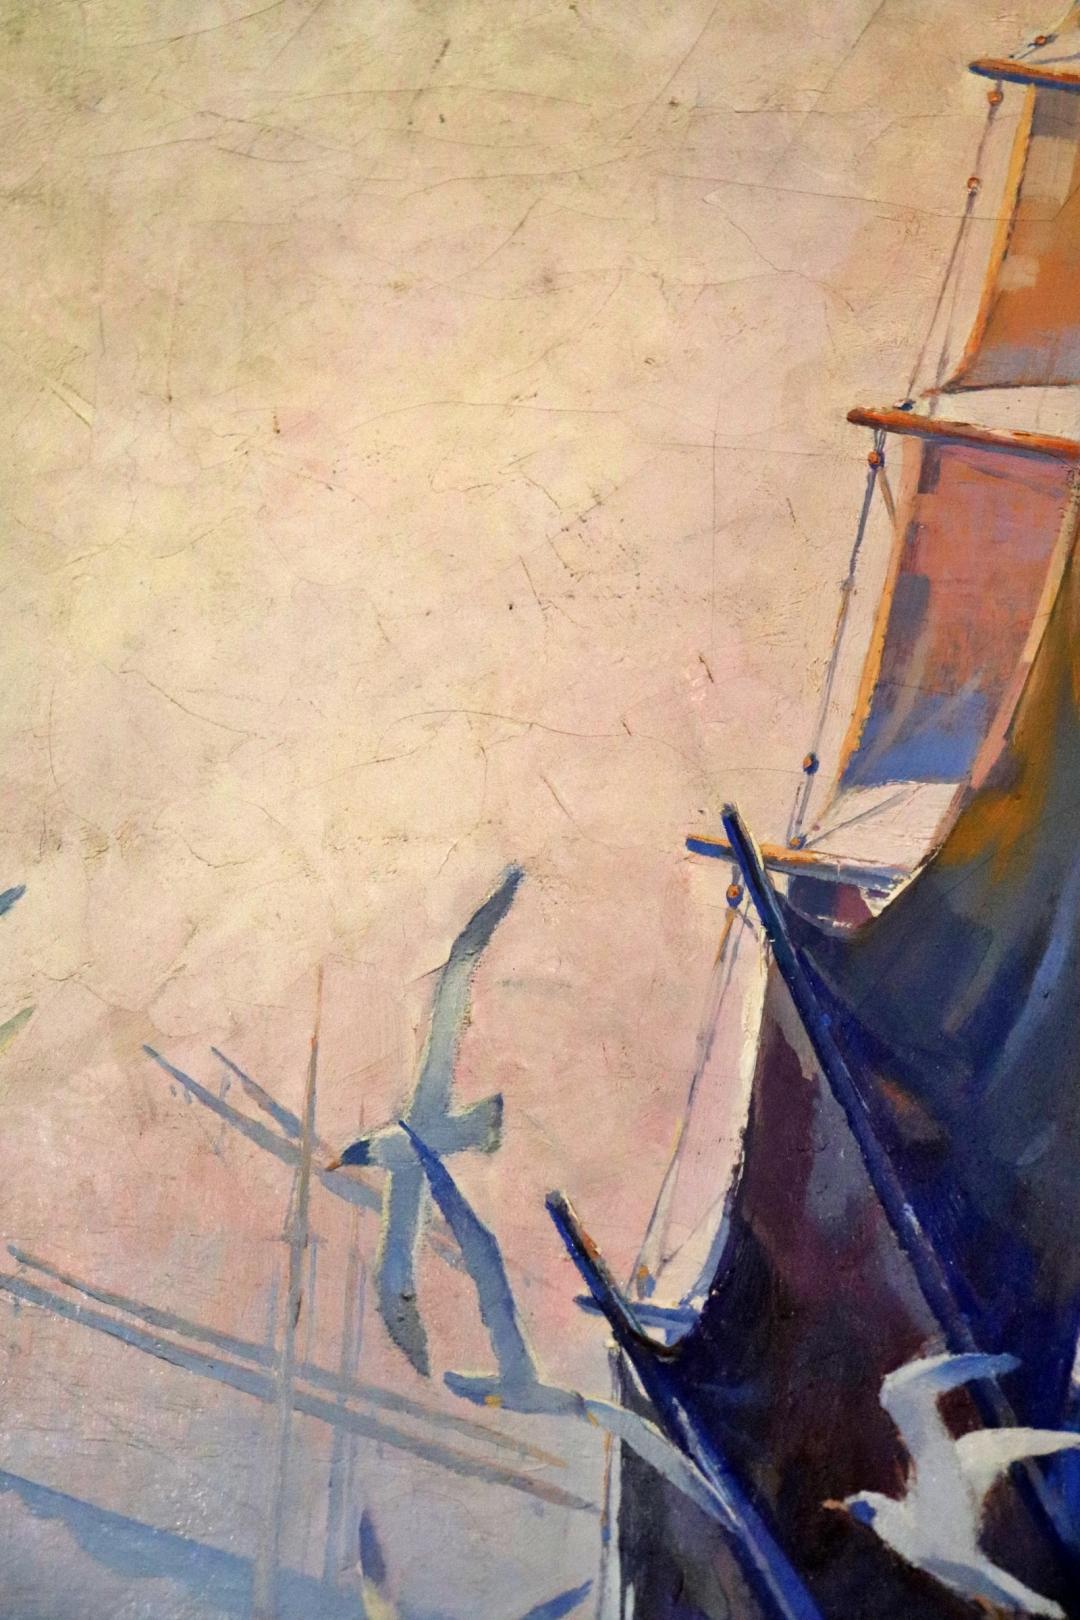 Mid-20th Century Gorgeous Oil Painting Sailing Ship Early Morning Fog signed A. Cucchi Dates 1939 For Sale